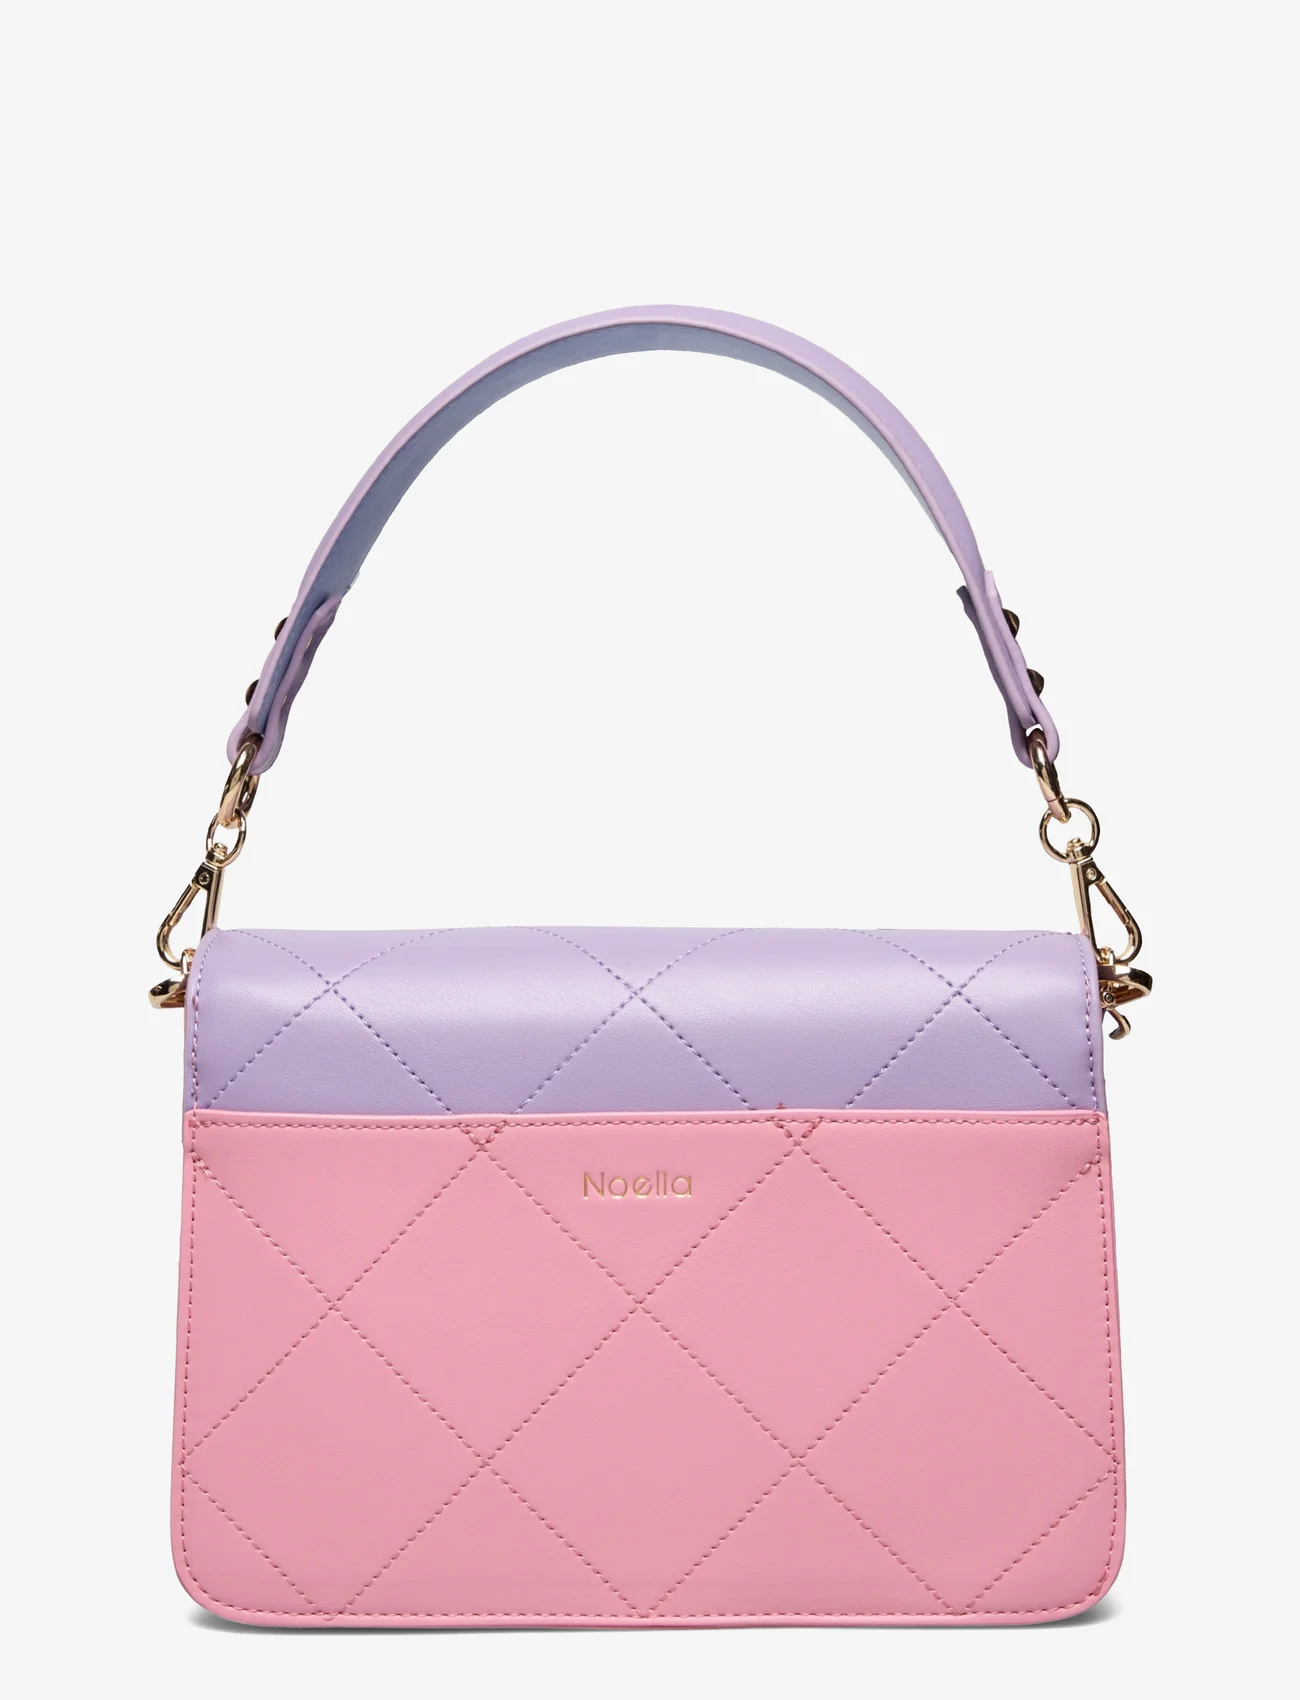 Noella - Blanca Multi Compartment Bag - party wear at outlet prices - light pink/light blue/purple - 1